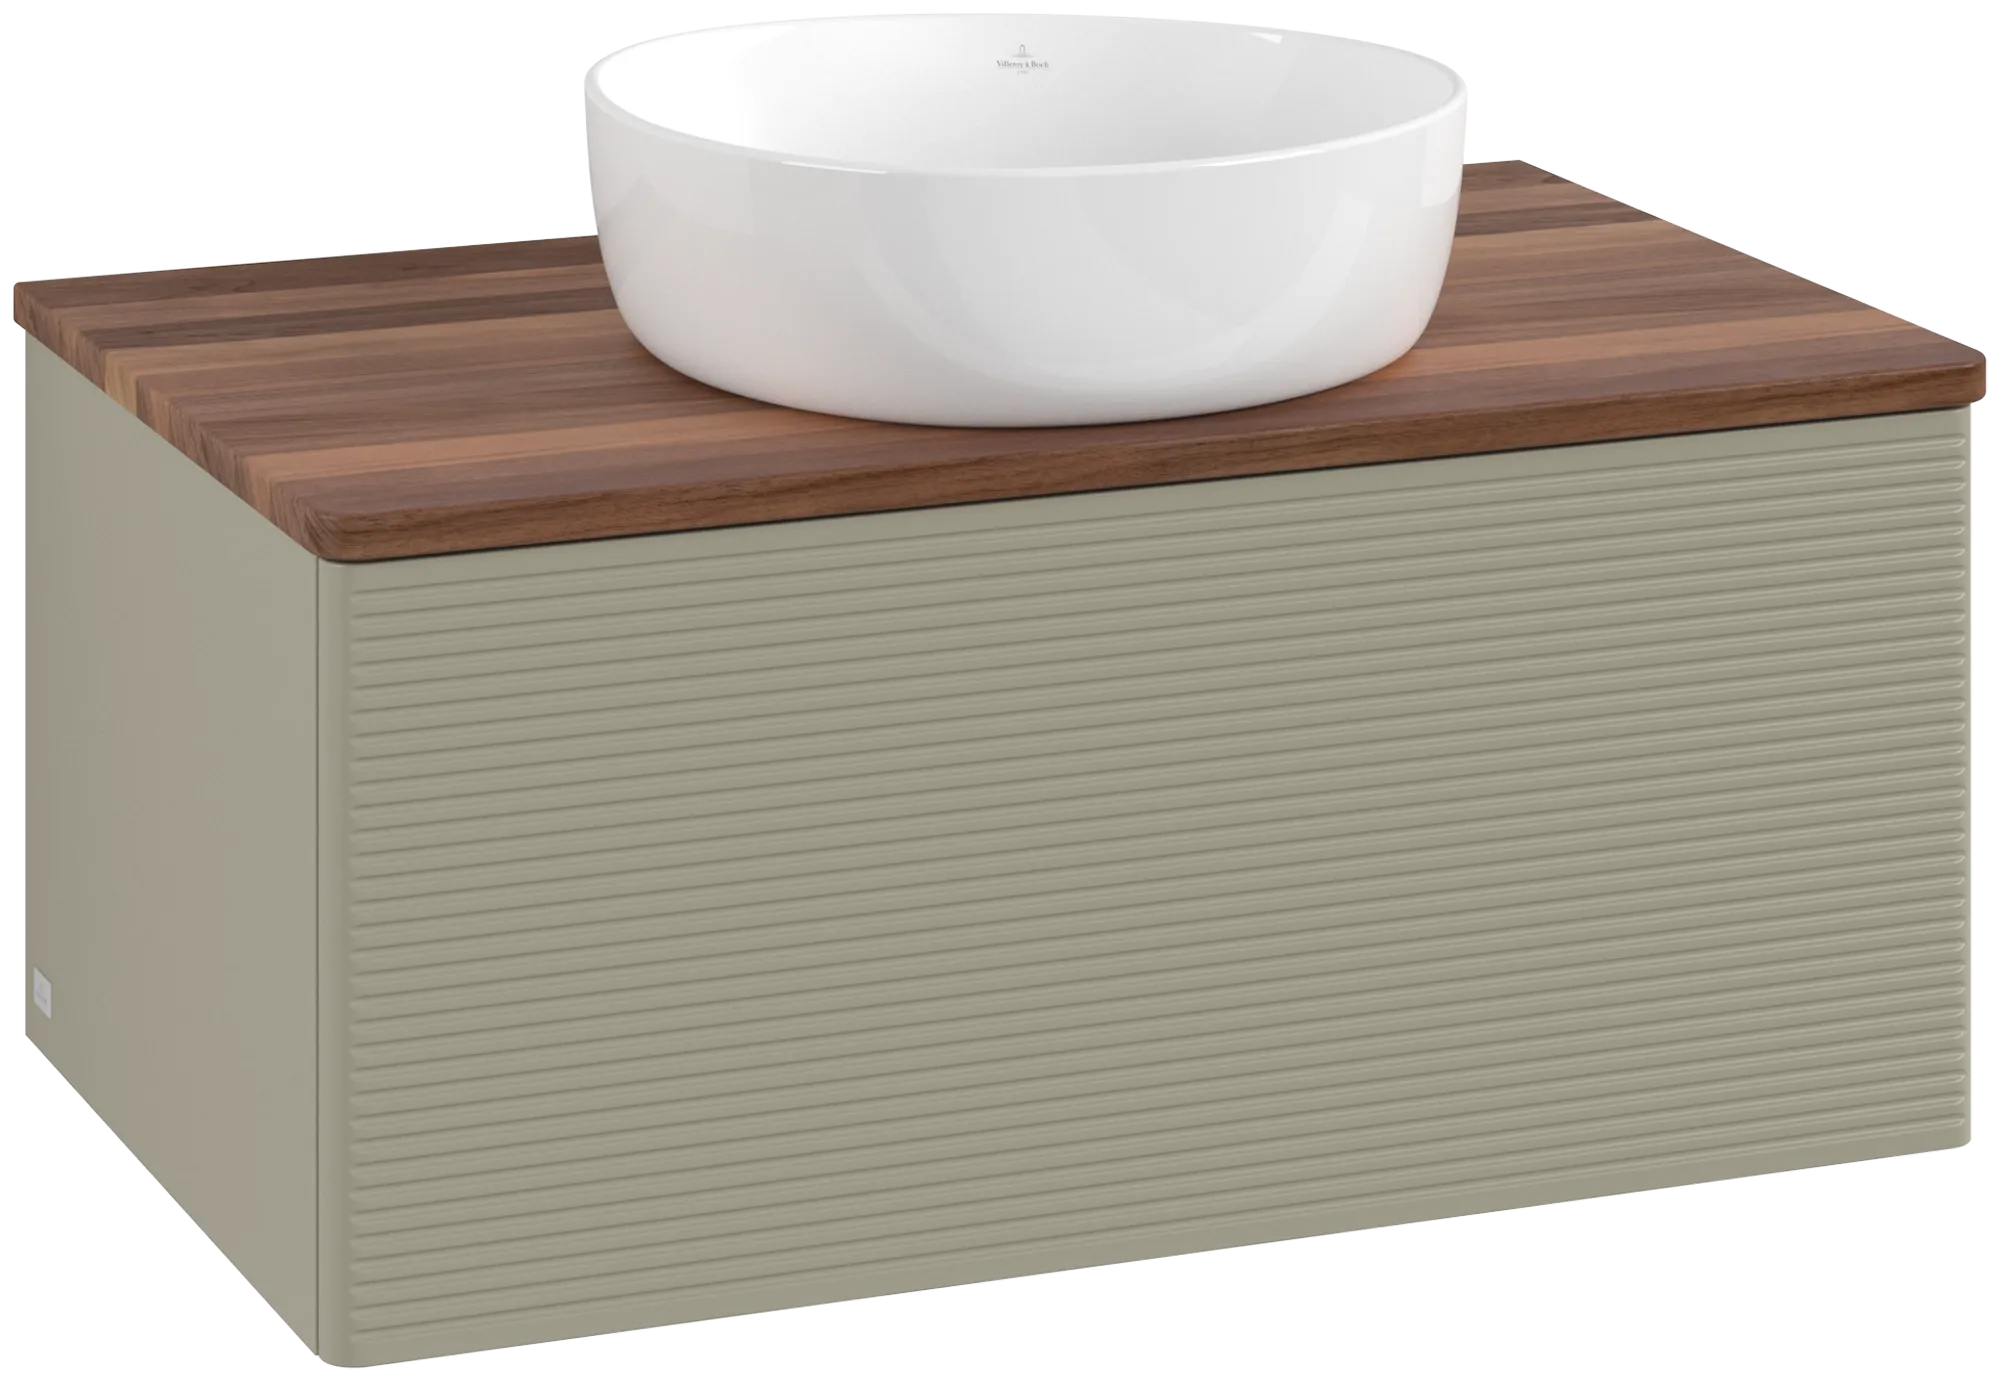 VILLEROY BOCH Antao Vanity unit, 1 pull-out compartment, 800 x 360 x 500 mm, Front with grain texture, Stone Grey Matt Lacquer / Warm Walnut #K30112HK resmi